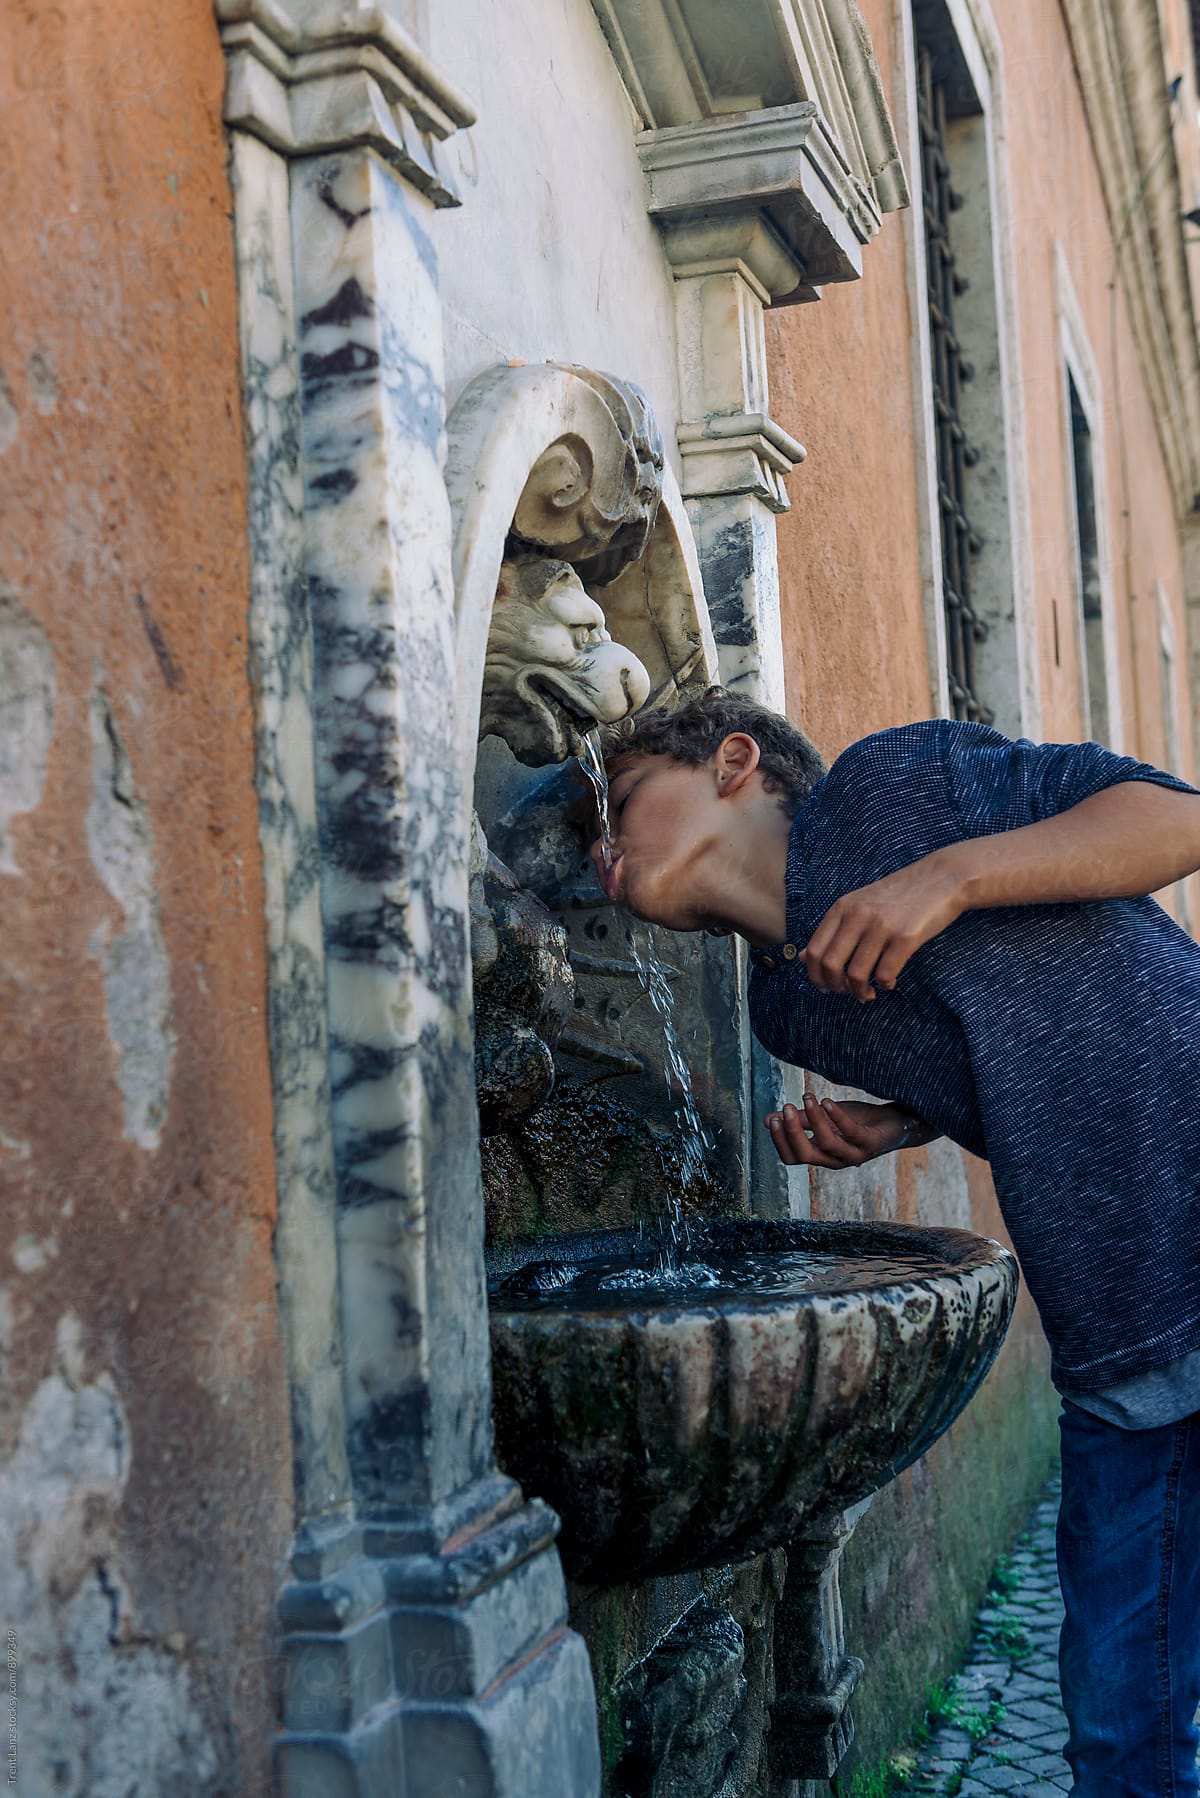 Boy drinking water from marble fountain on street in Rome